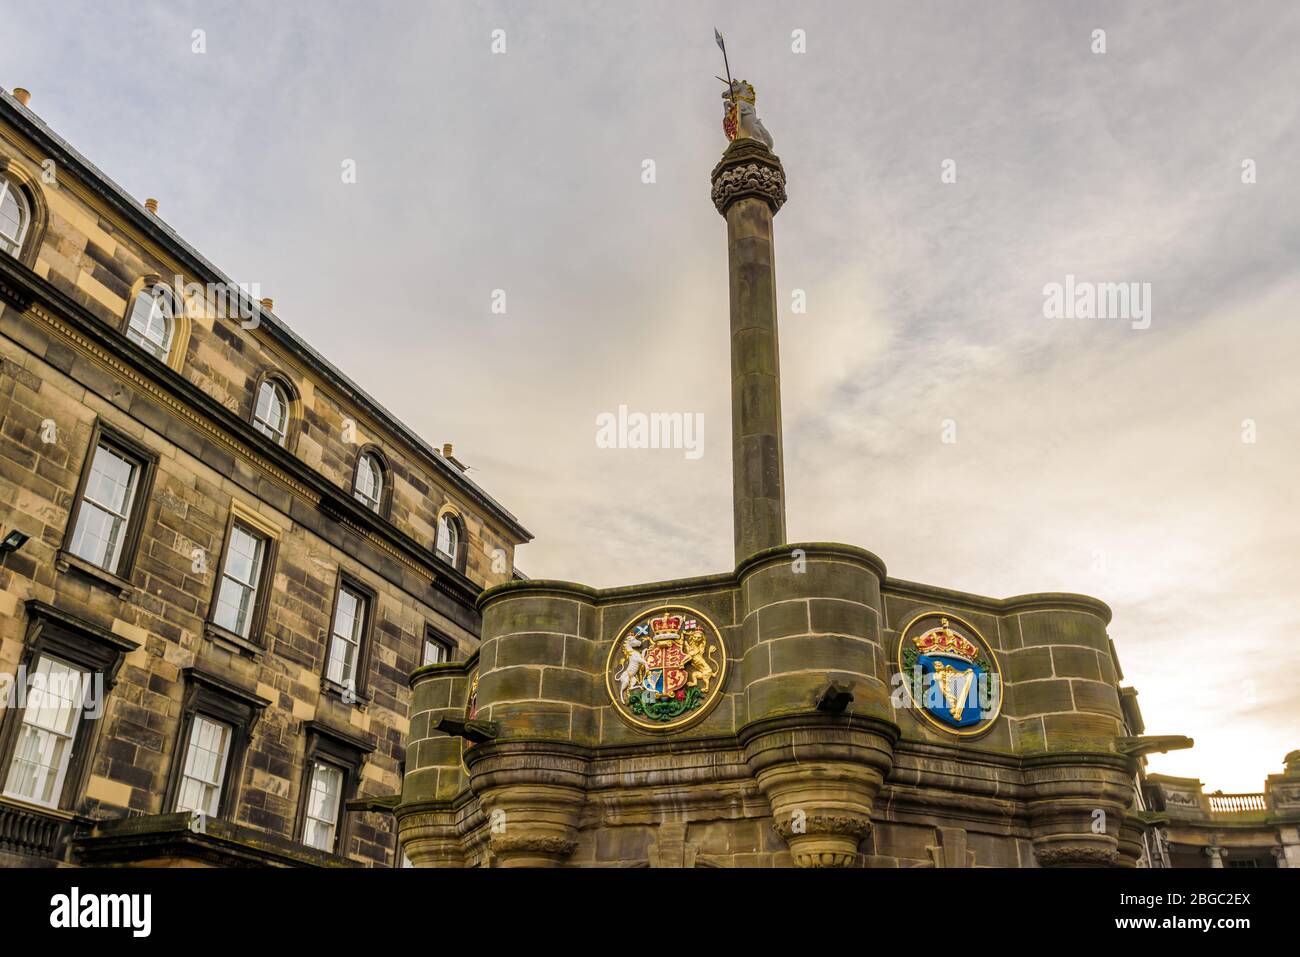 Mercat Cross, ancient site of civic announcements on the Royal Mile in Edinburgh. This tall monument is topped by a unicorn & the Scottish flag. Stock Photo